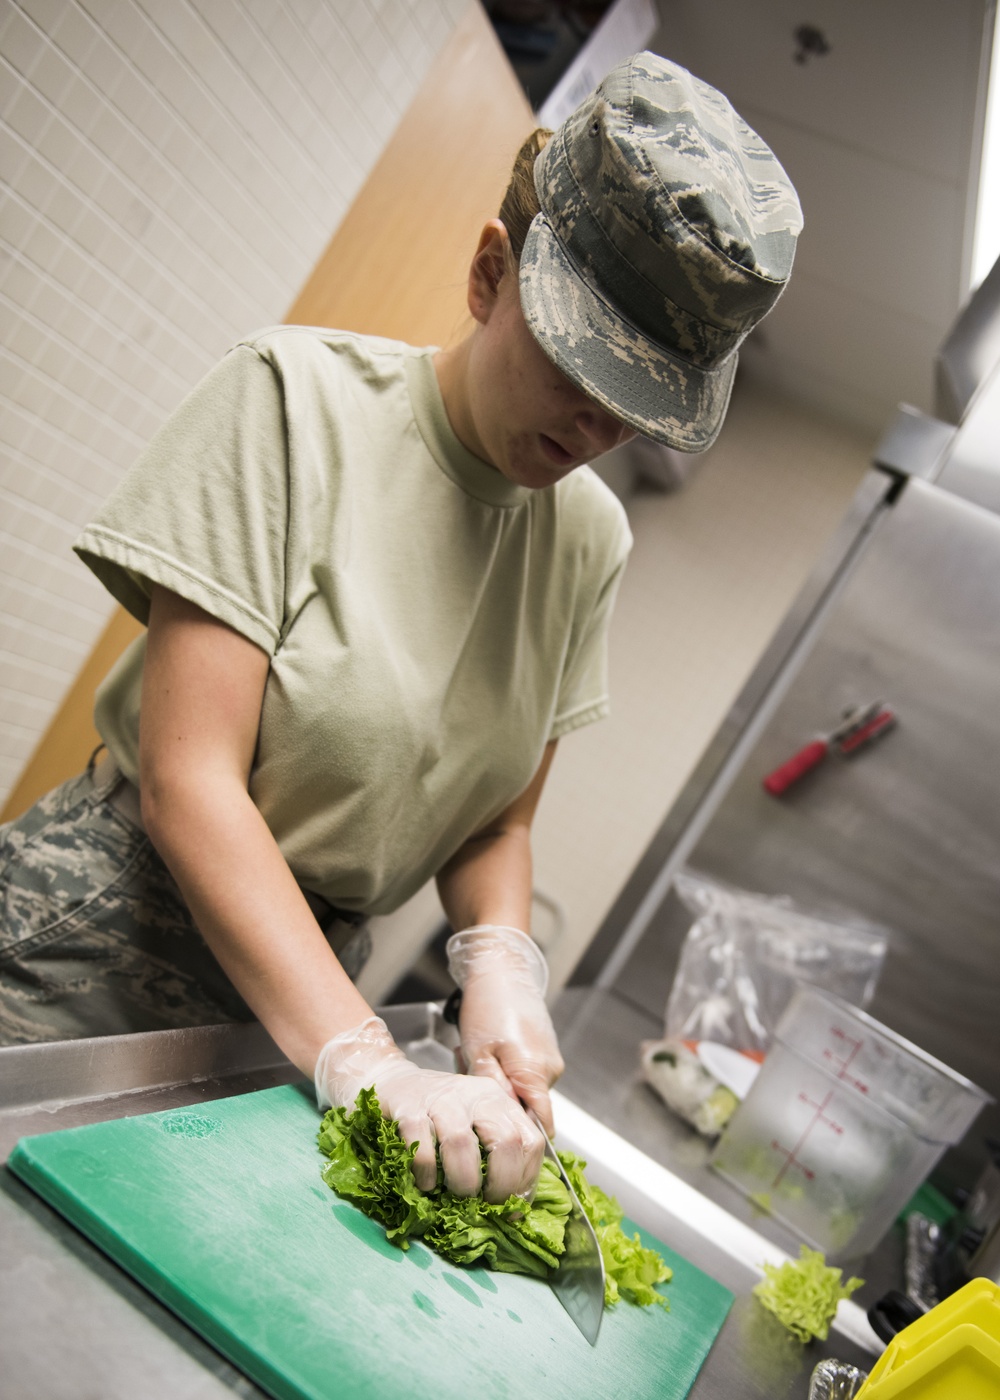 Missile chef: making meals in the missile field